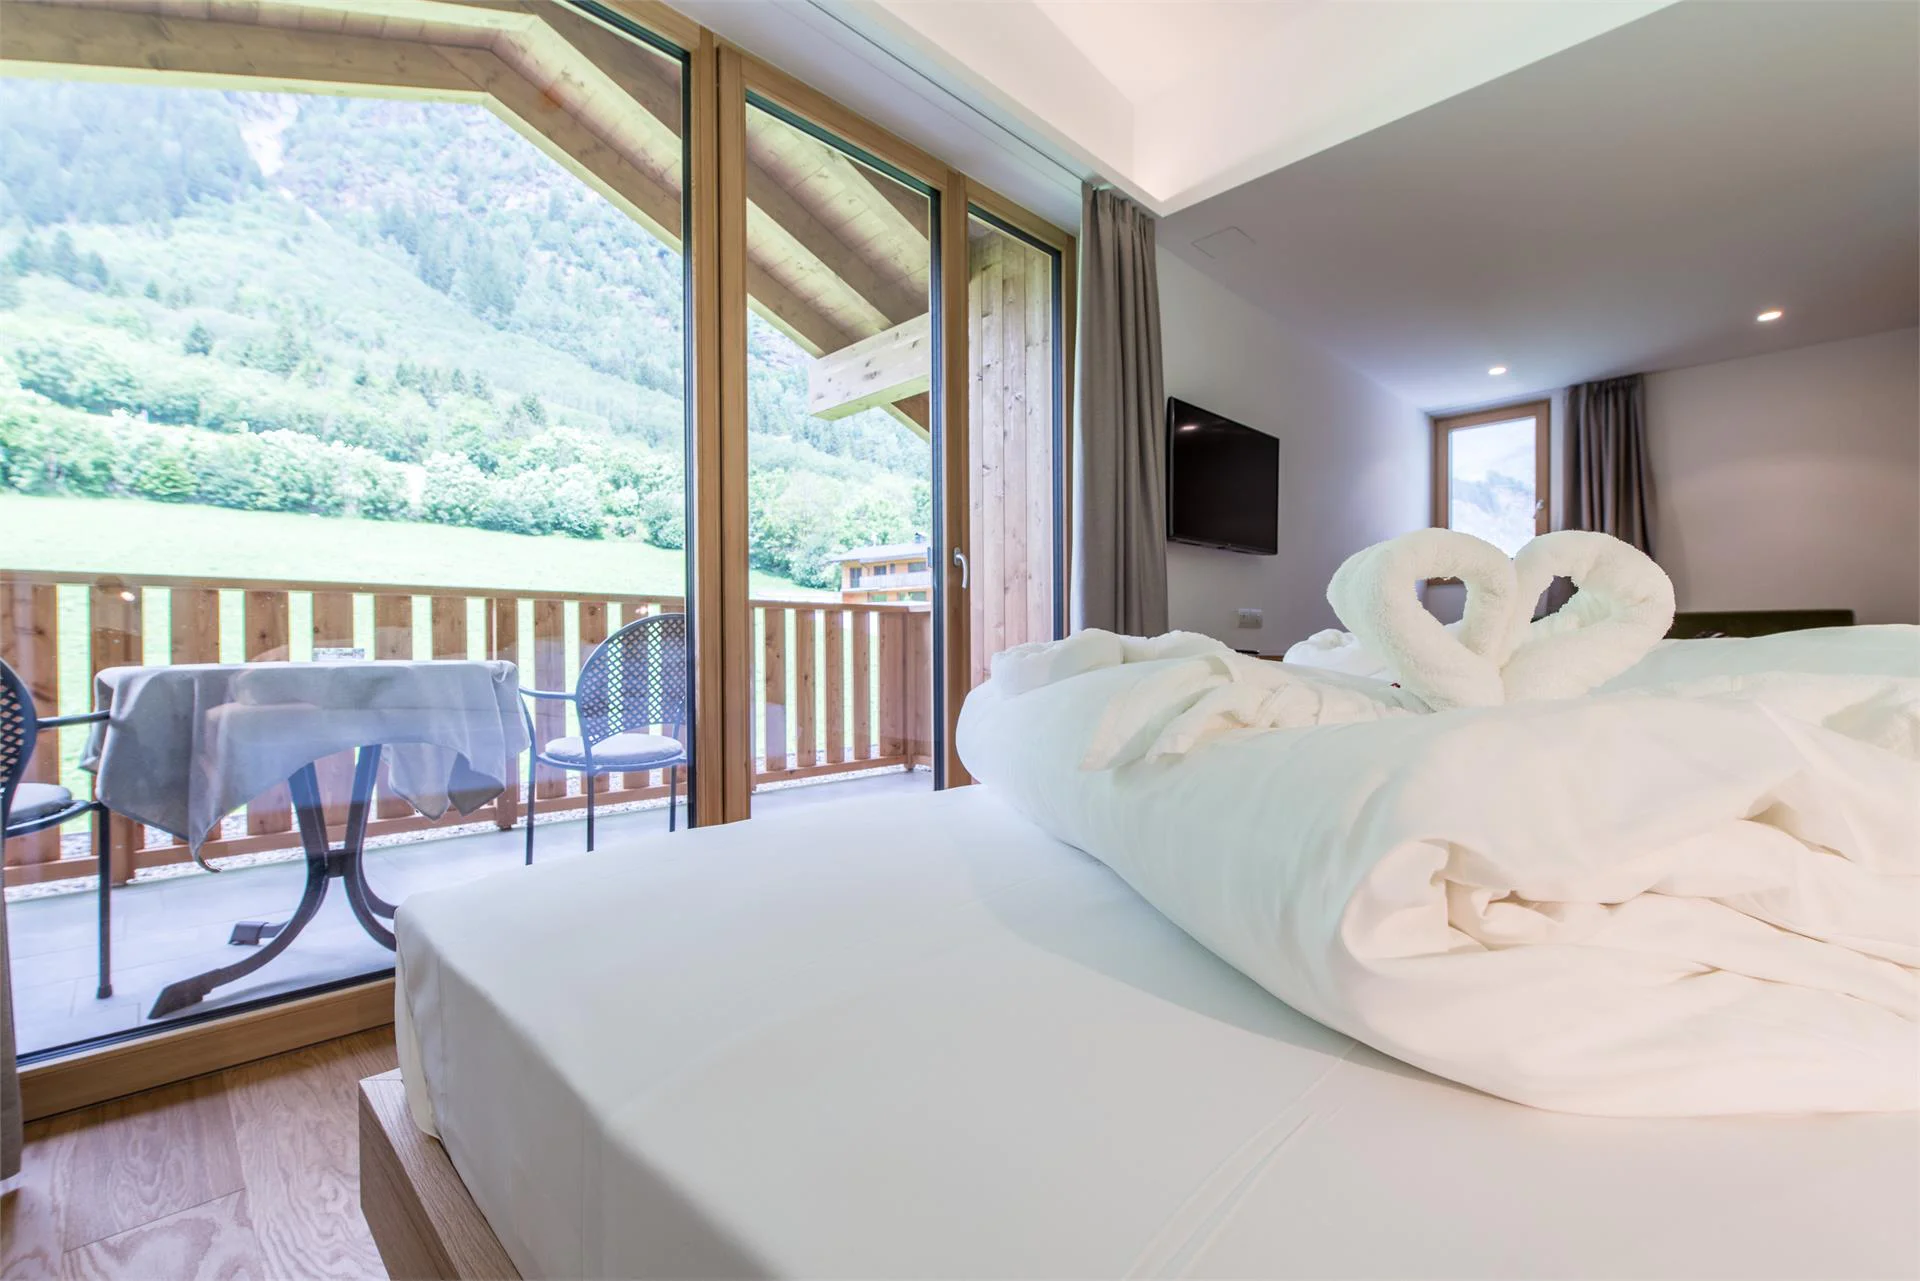 Hotel Taufers Campo Tures 24 suedtirol.info